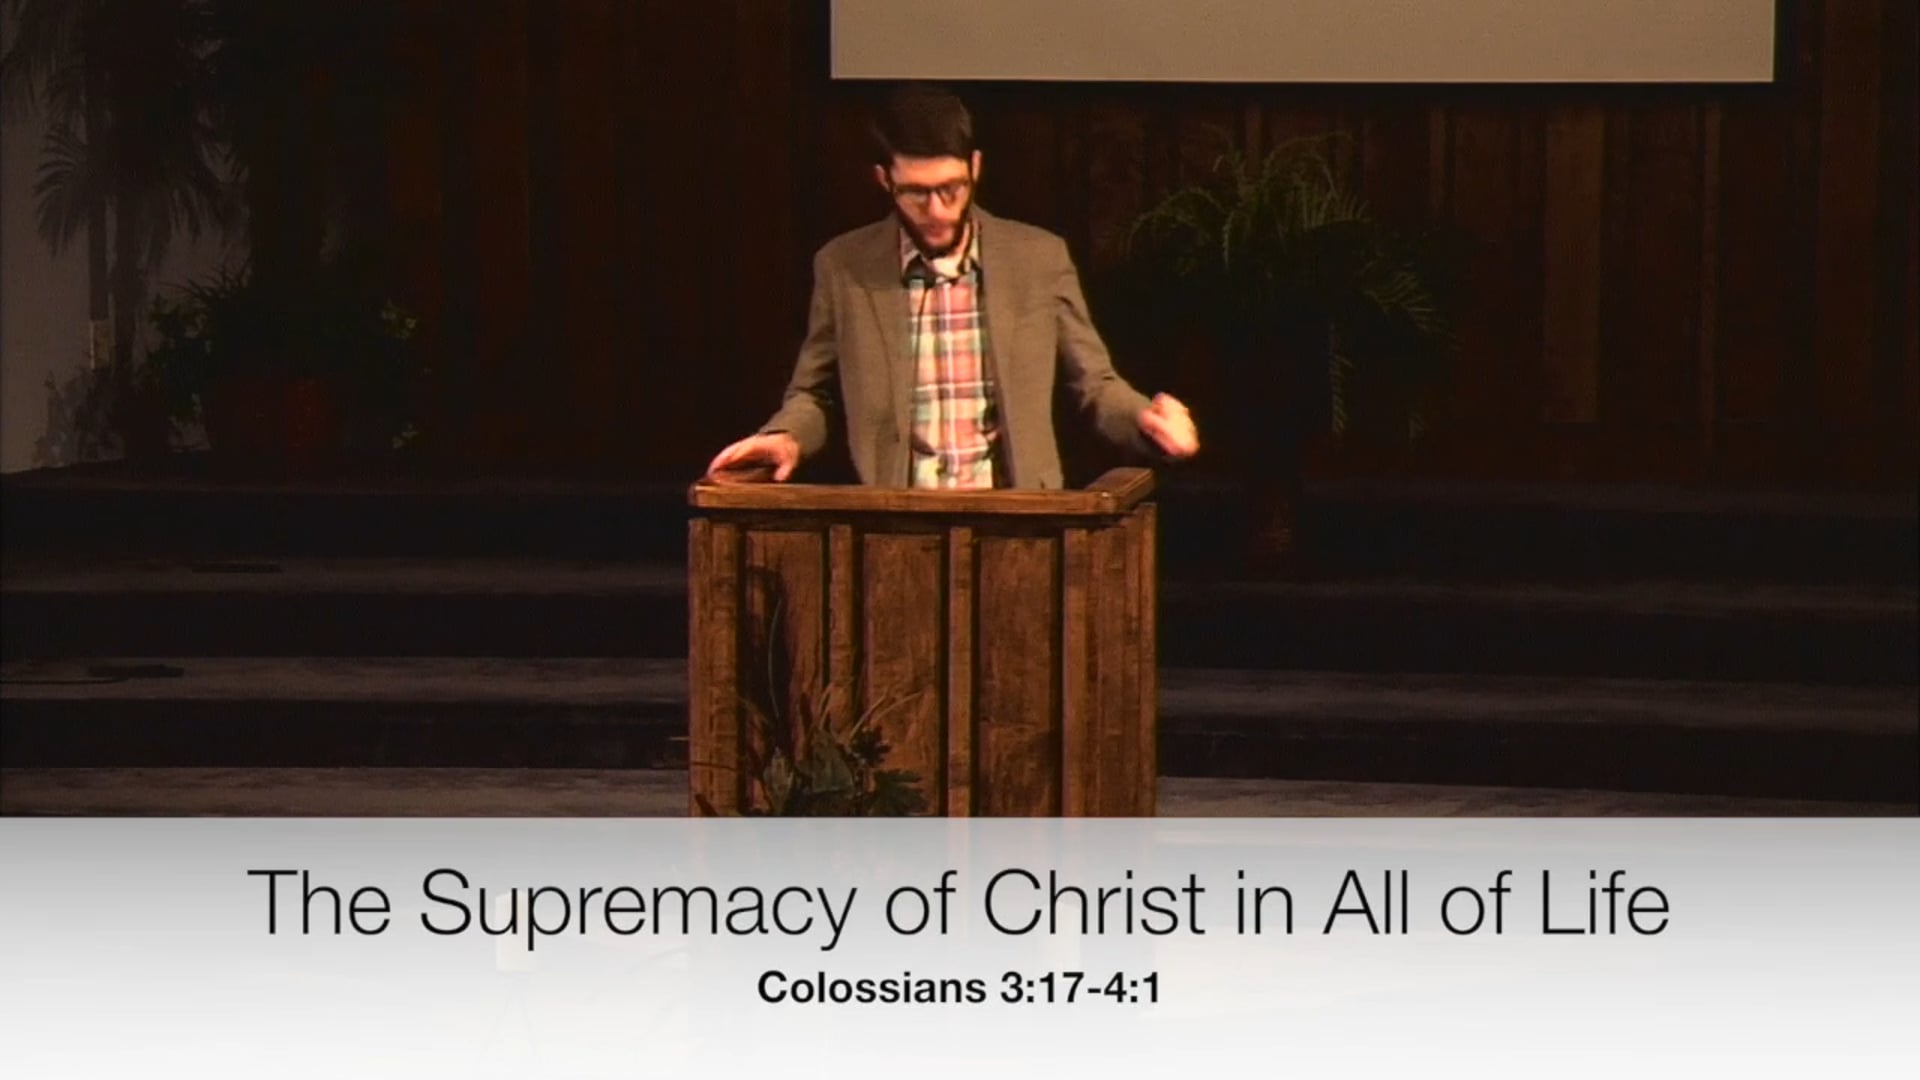 The Supremacy of Christ in All of Life